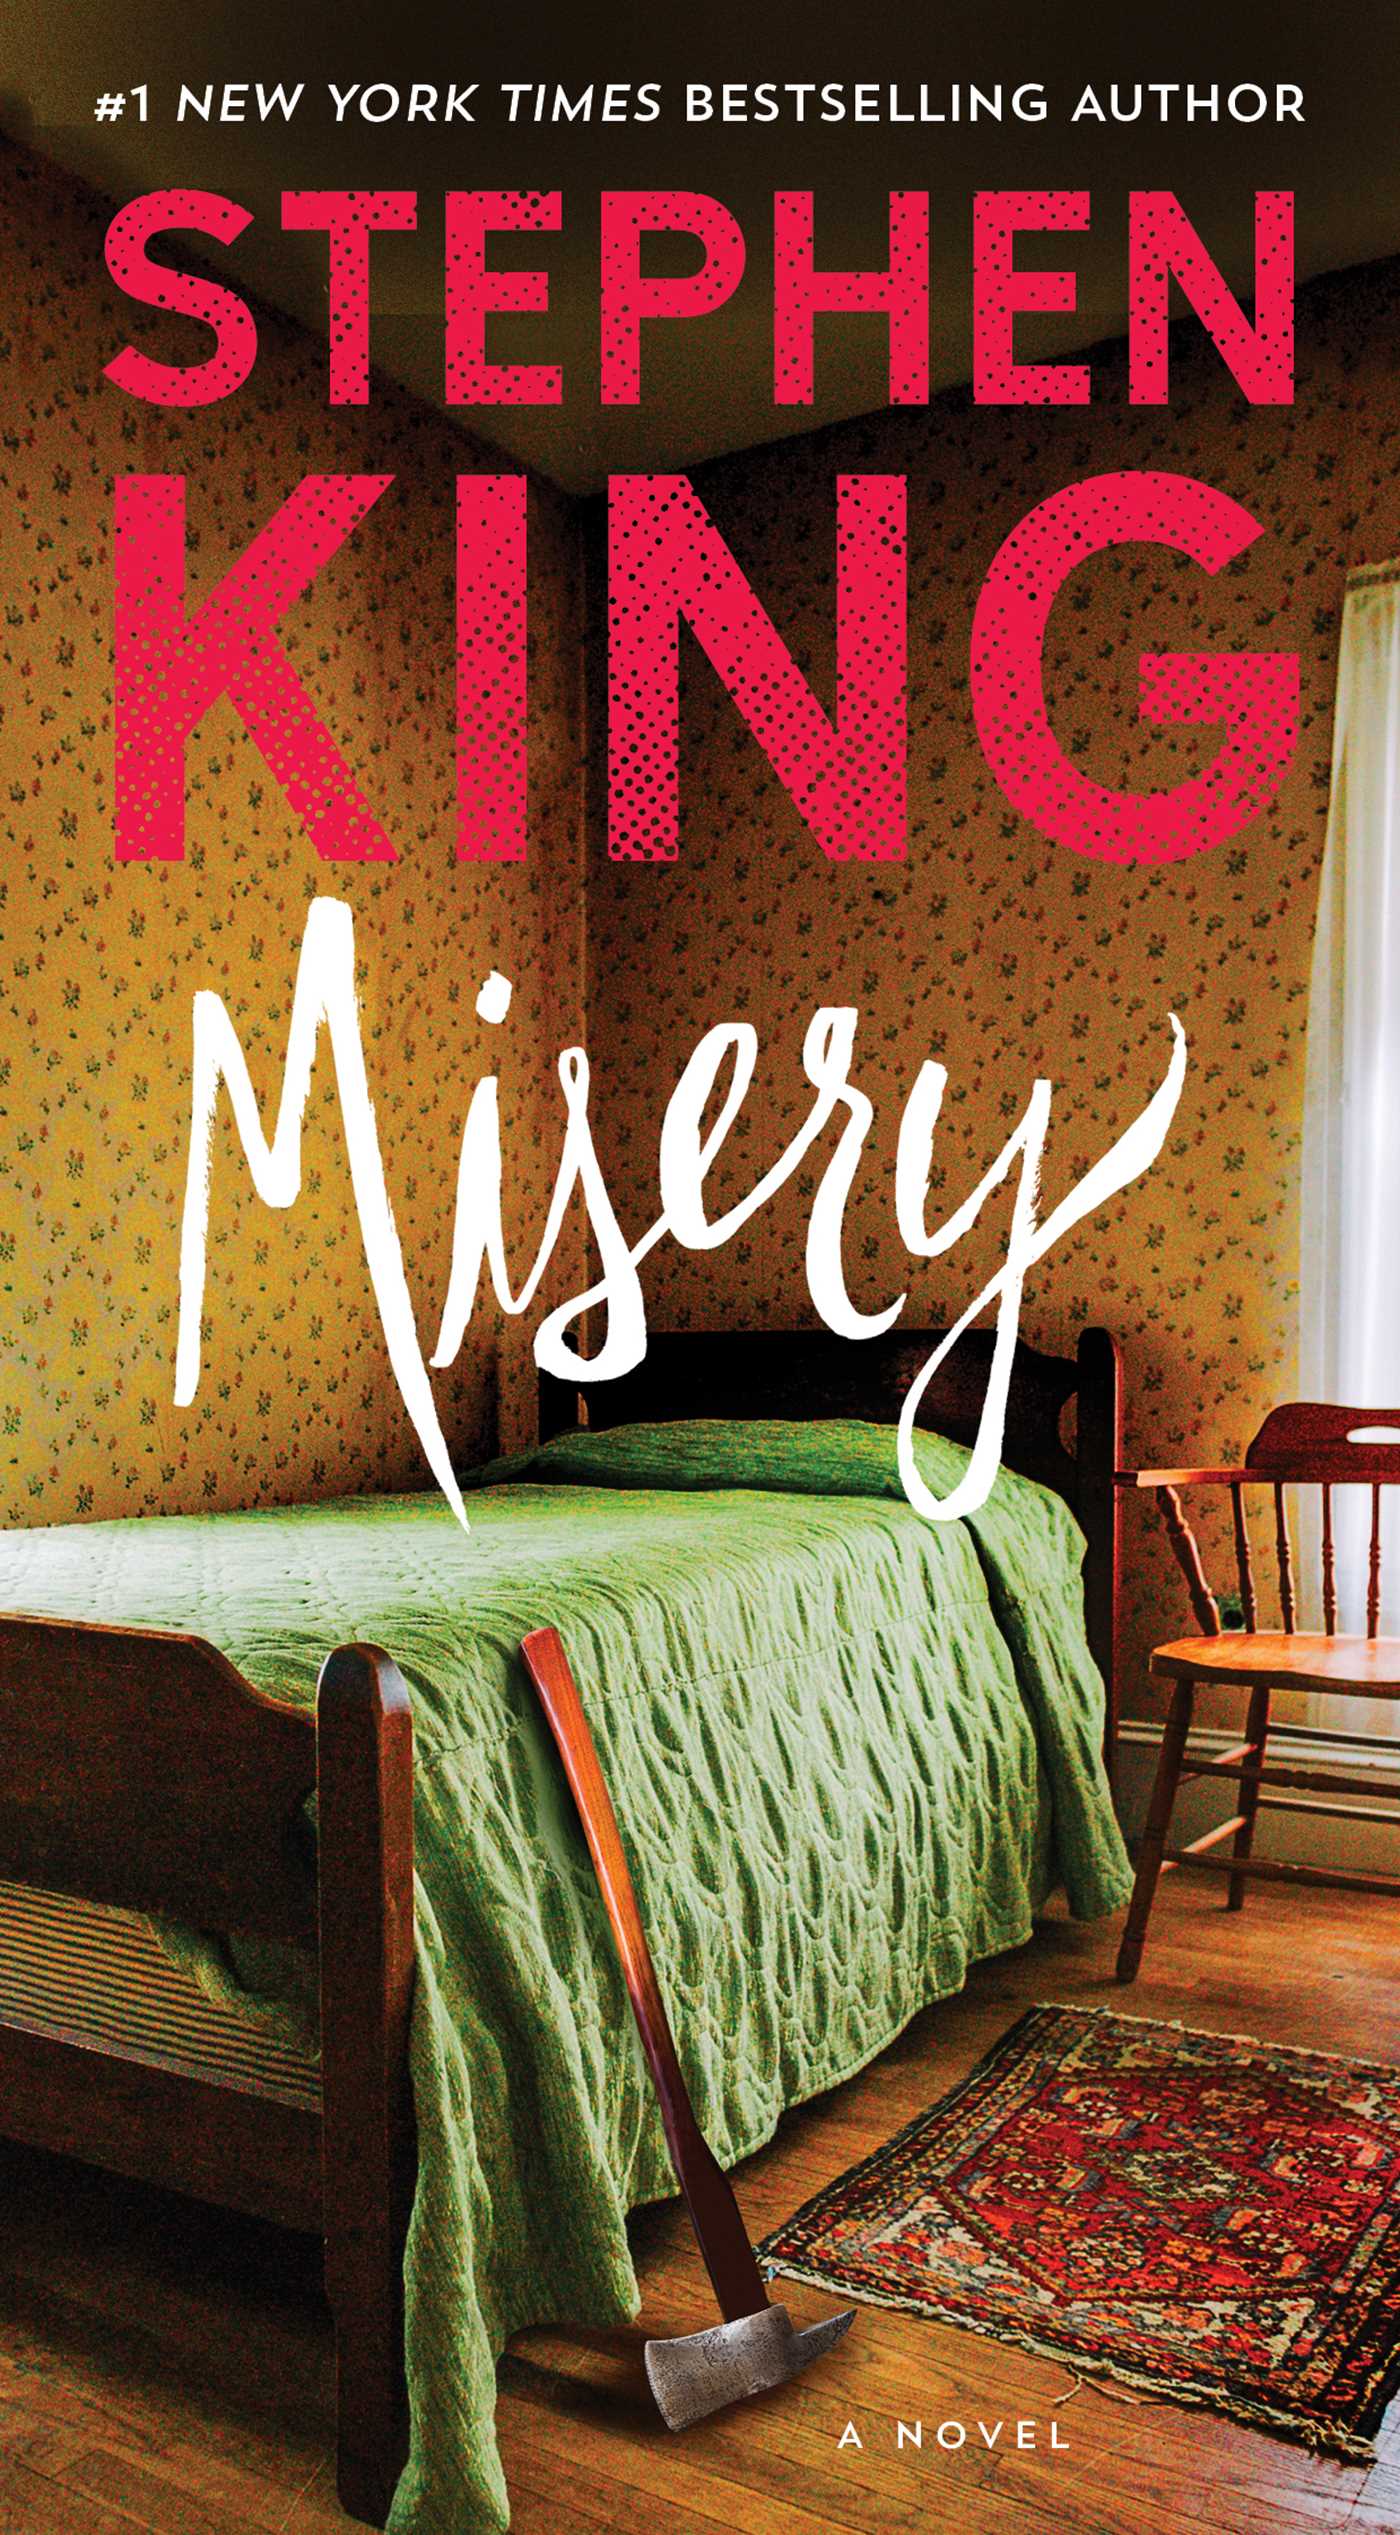 stephen king misery book review